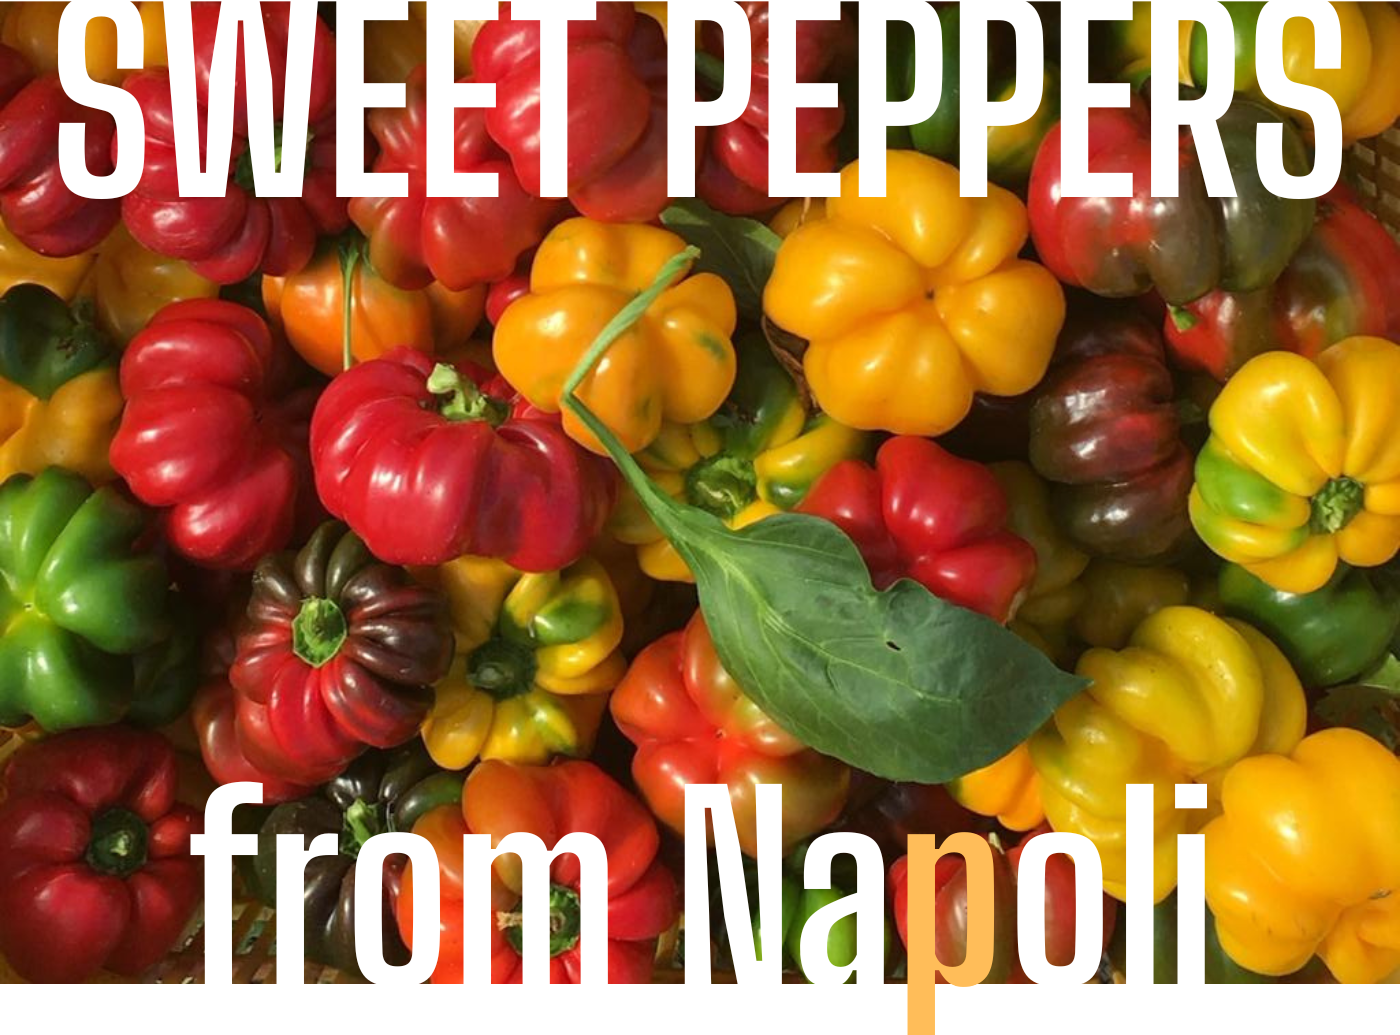 Papaccelle sweet peppers from Naples